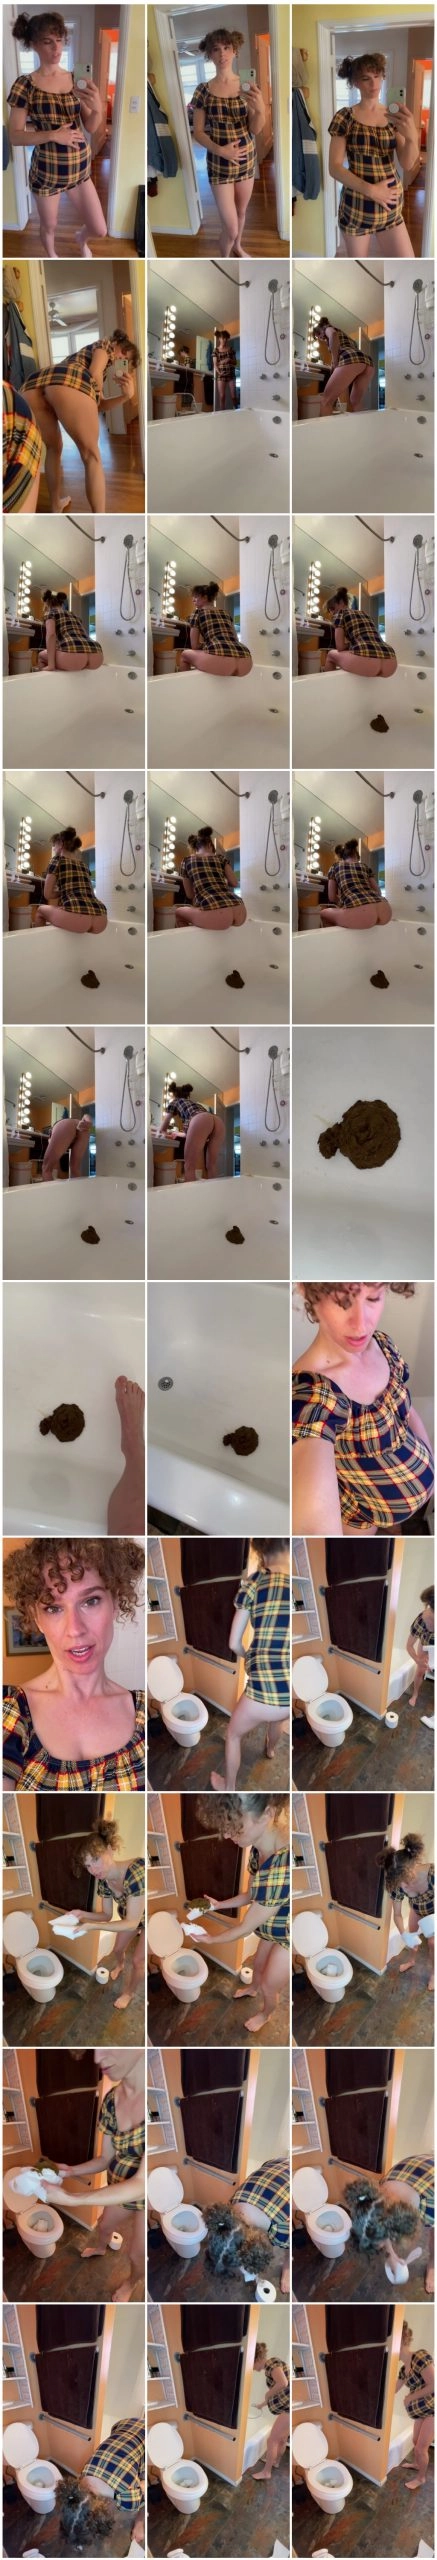 VibeWithMolly - Pregnant Role Play Poop in Bathtub [Scat solo, shit, defecation, Pissing]